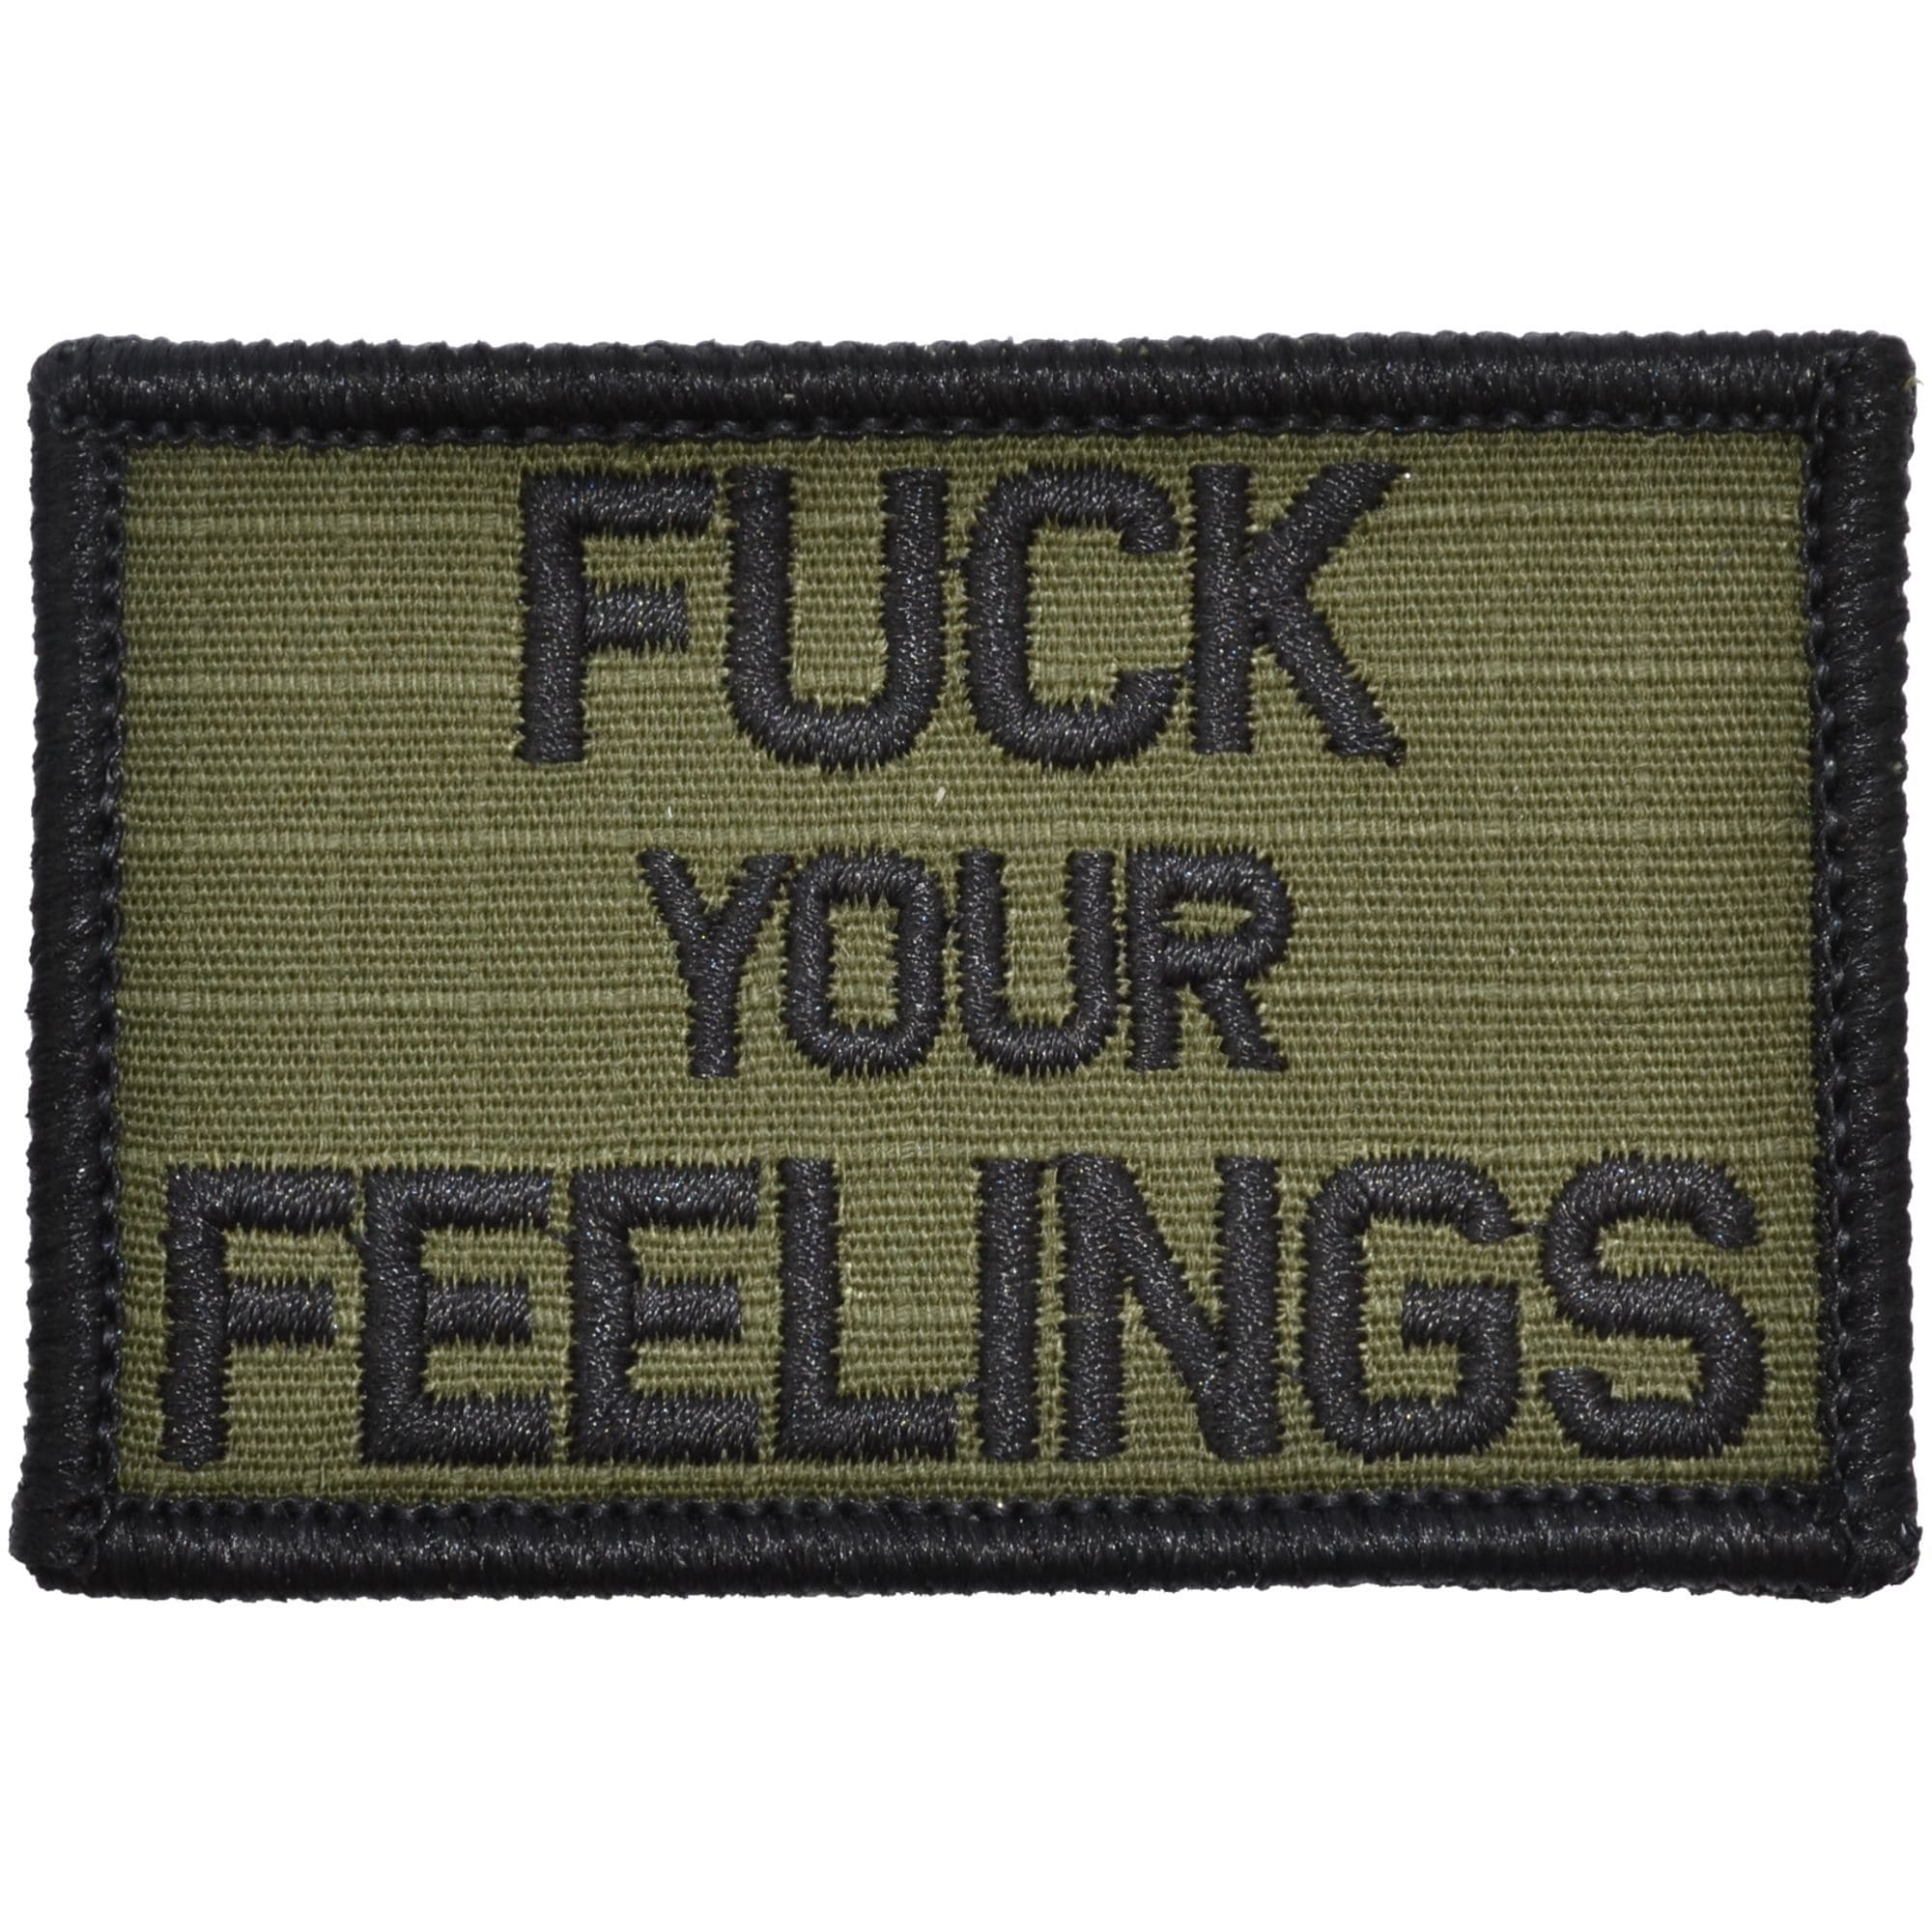 Tactical Gear Junkie Patches Olive Drab Fuck Your Feelings - 2x3 Patch